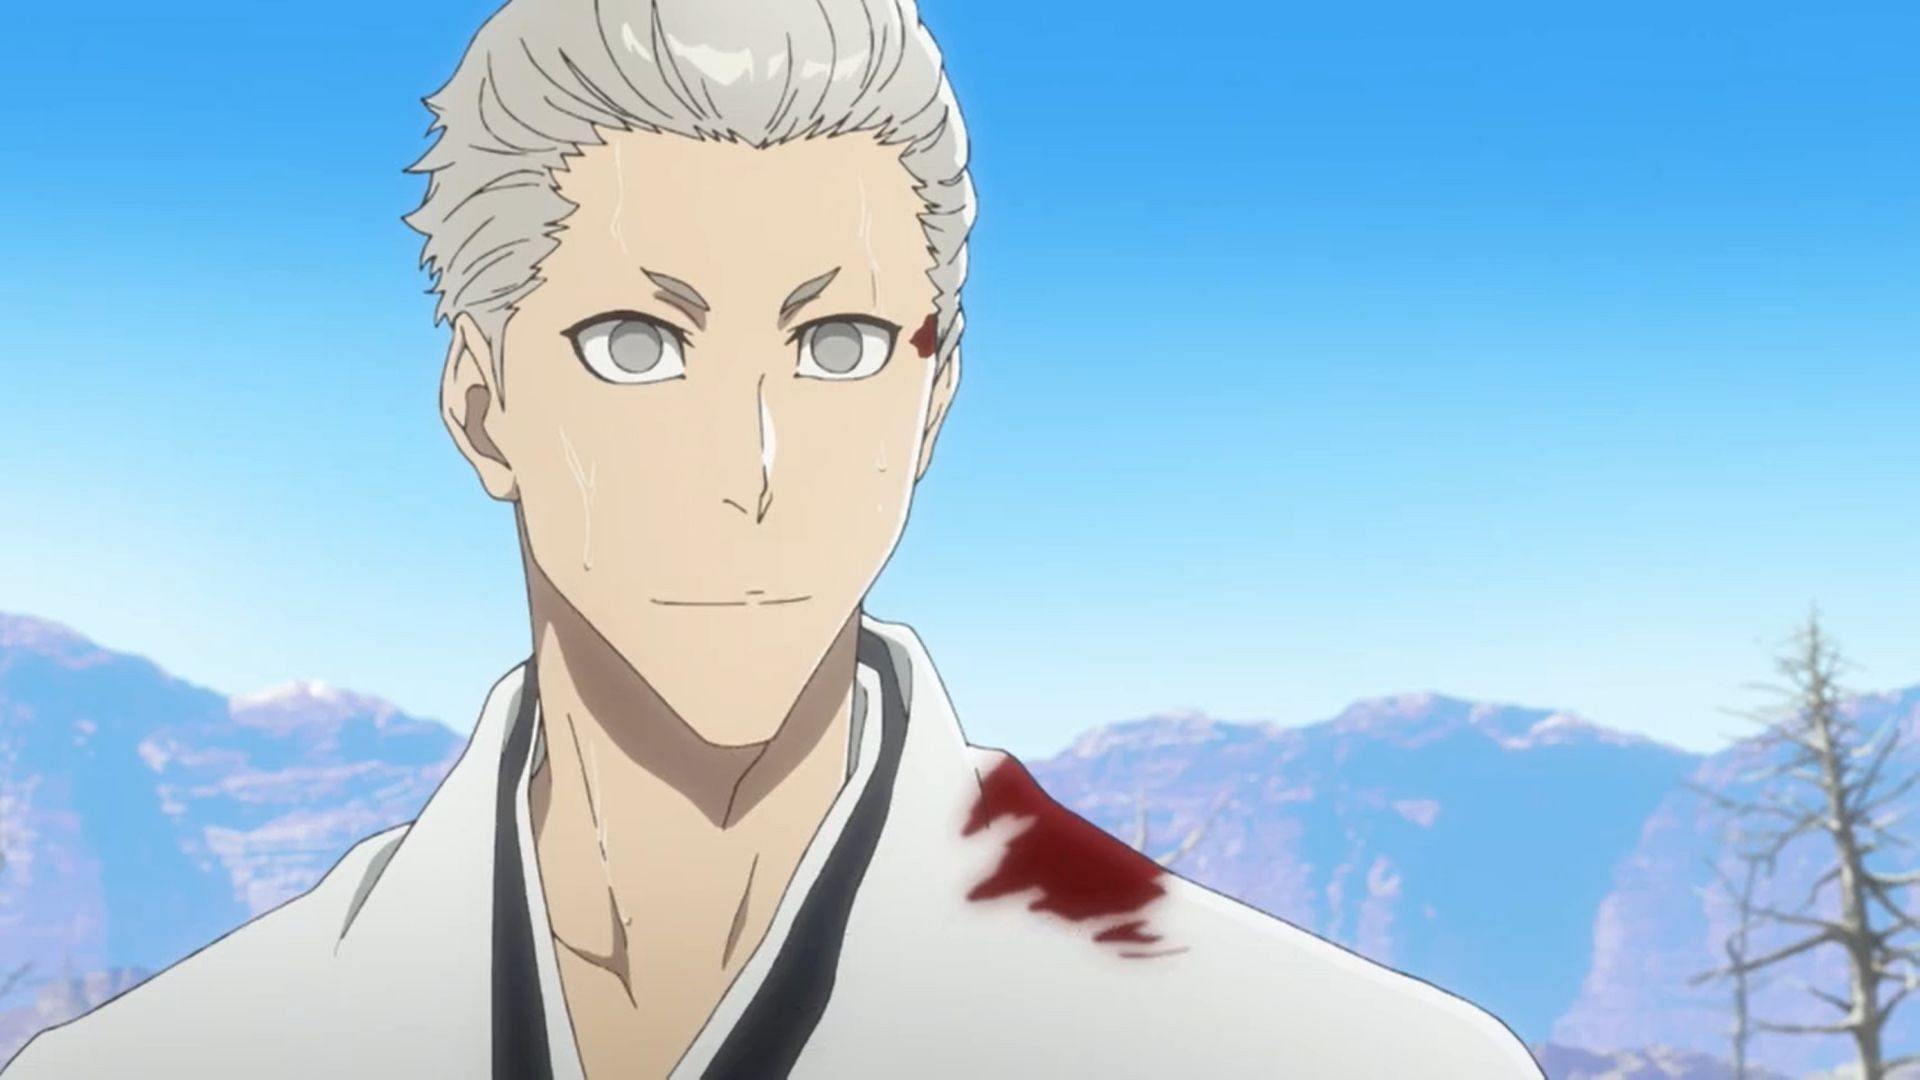 Bleach Thousand Year Blood War Episode 5 Review: The Show Has